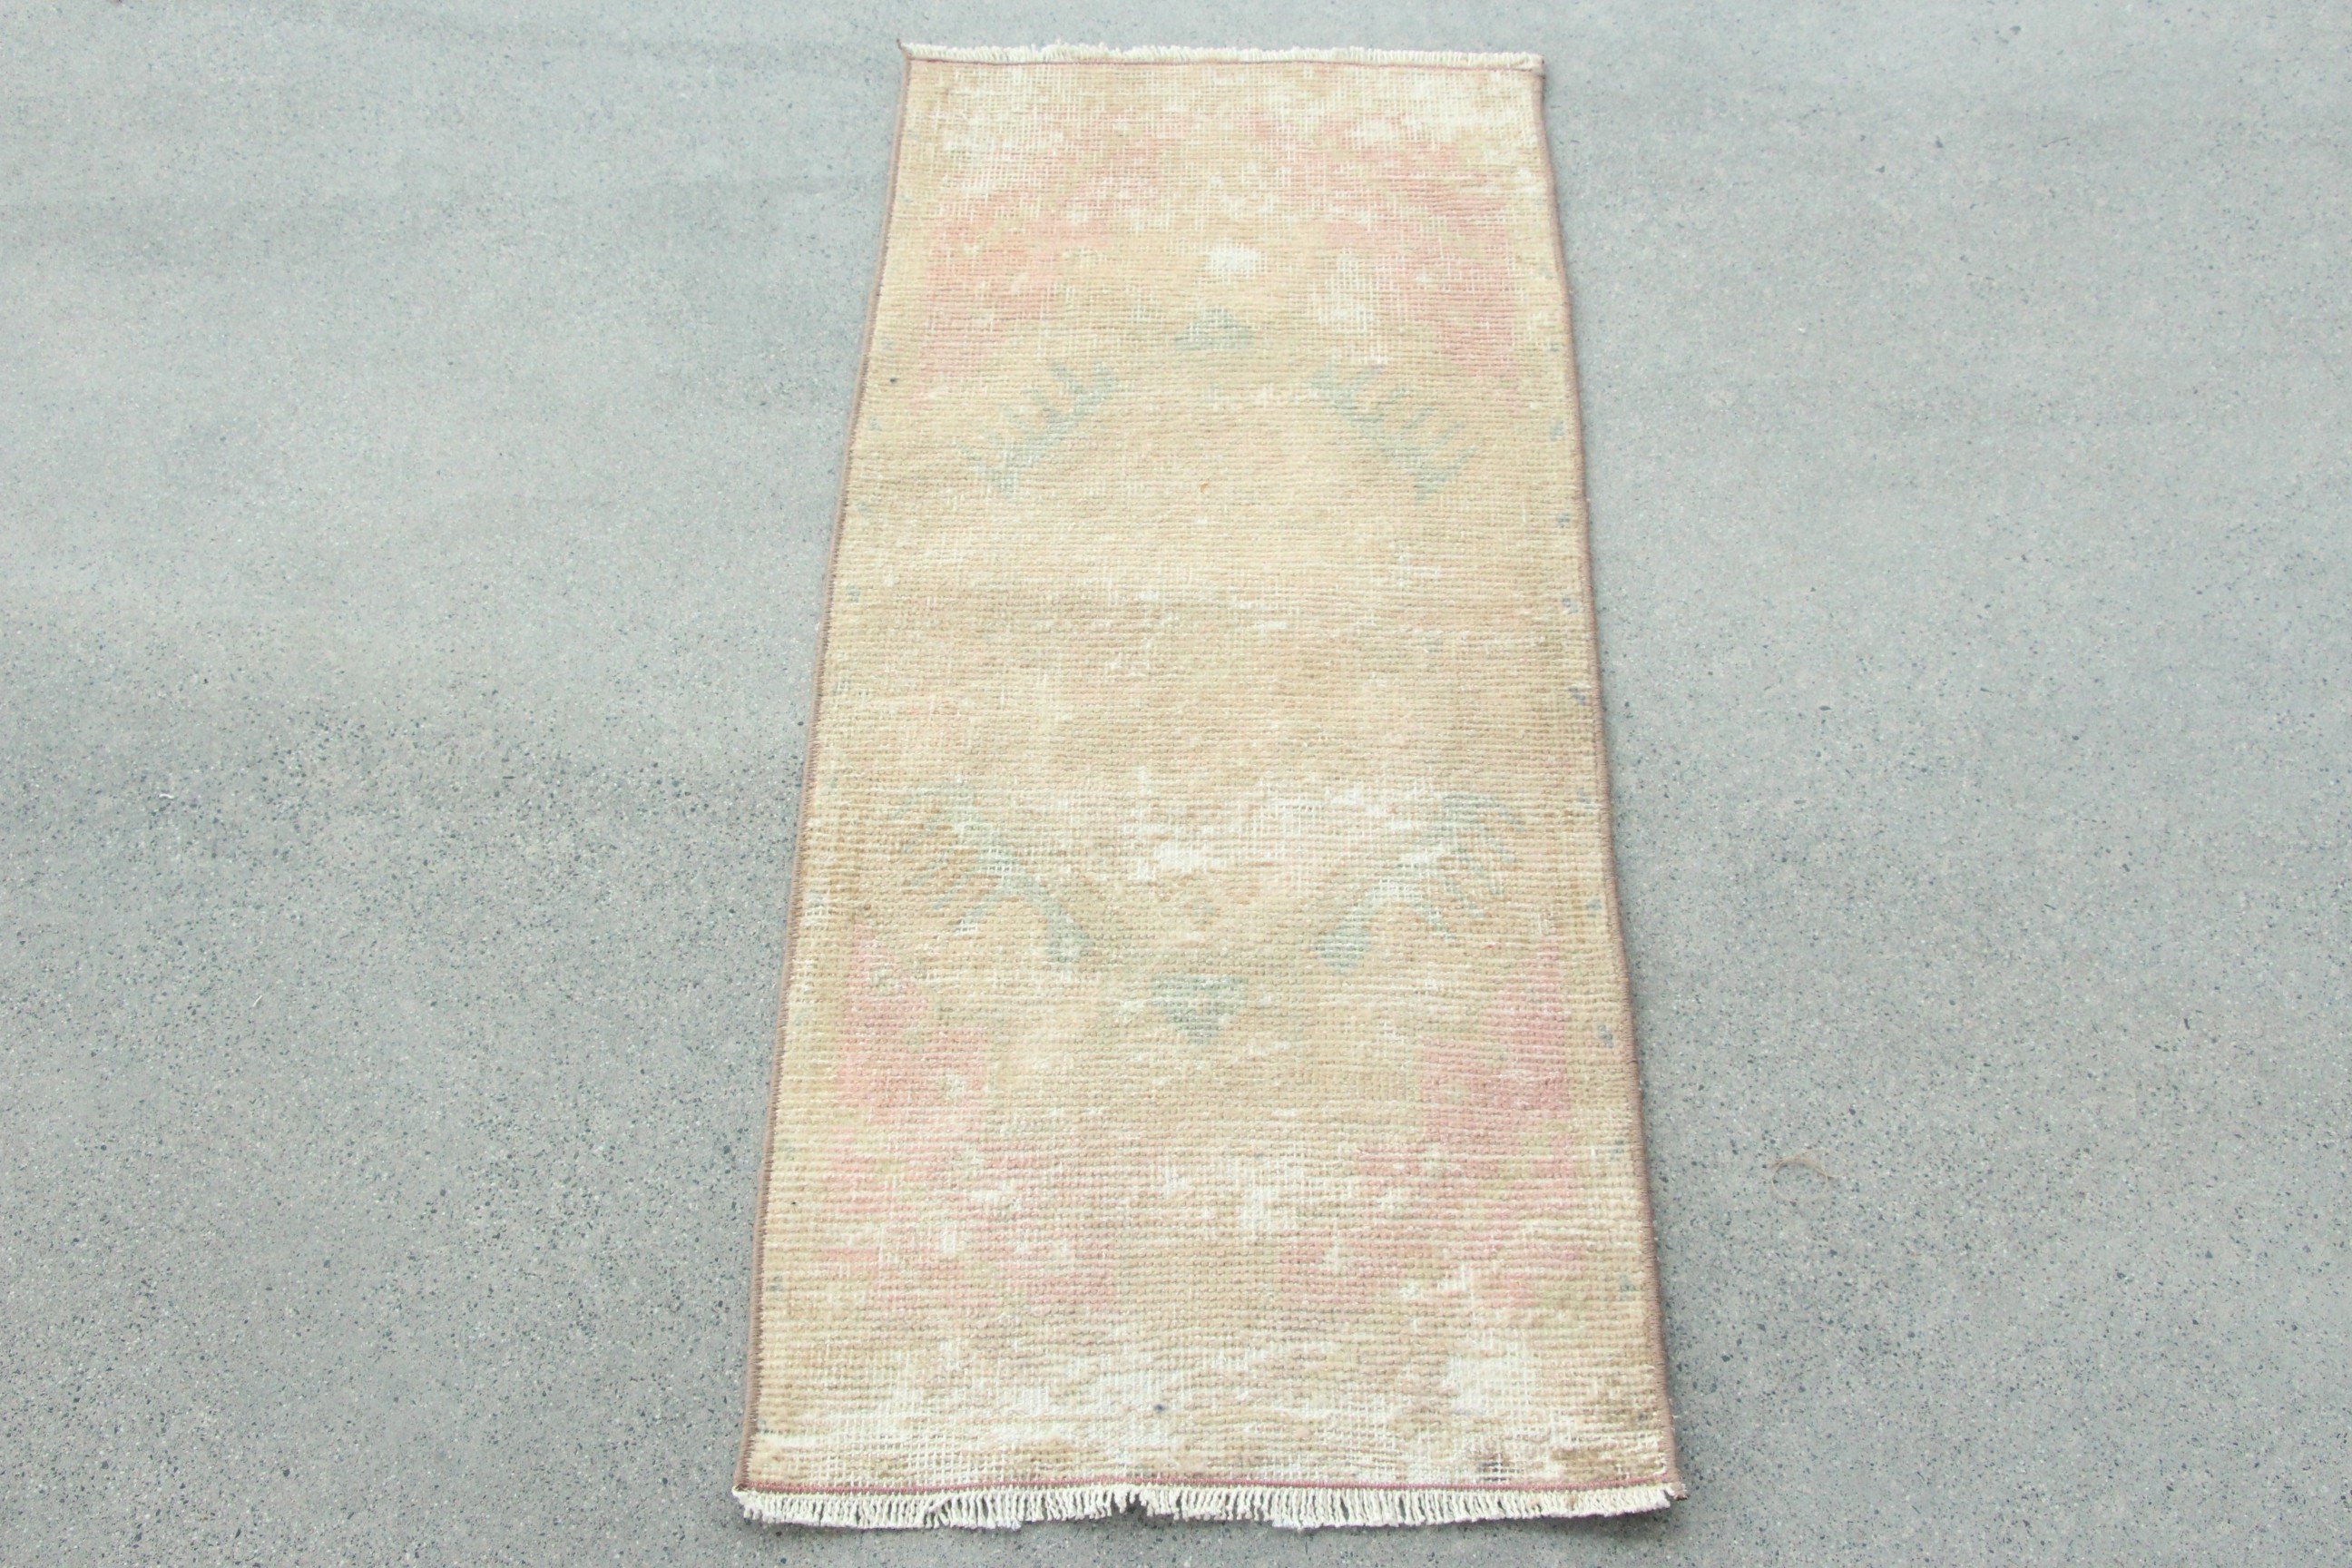 Door Mat Rug, White Moroccan Rugs, Kitchen Rug, Natural Rug, 1.4x3.3 ft Small Rug, Turkish Rug, Car Mat Rug, Vintage Rugs, Antique Rugs